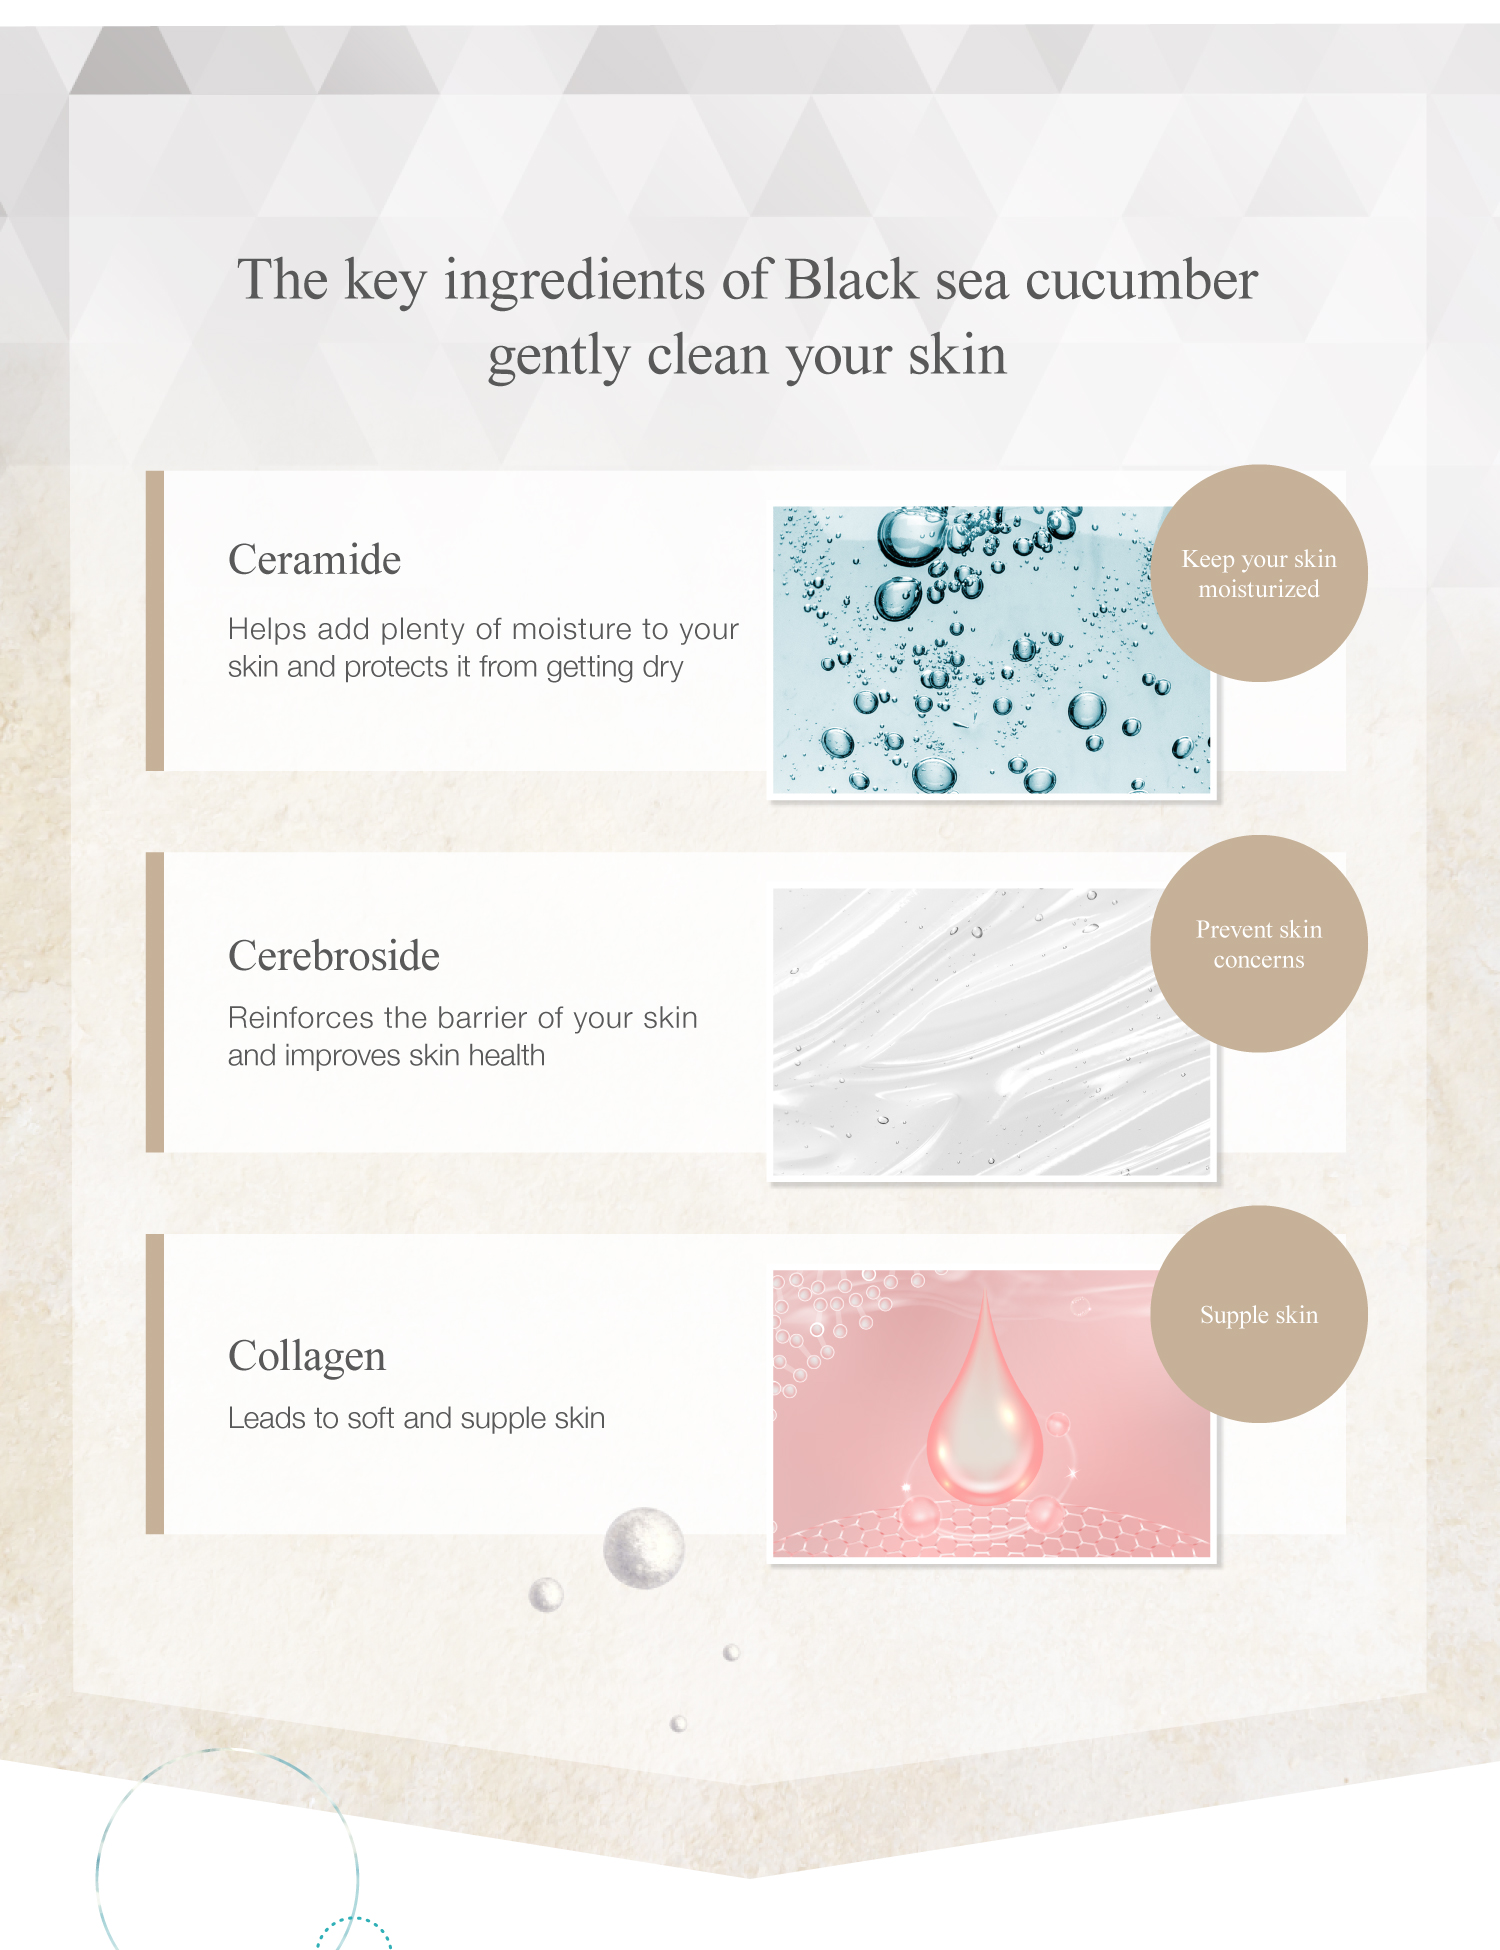 The key ingredients of Black sea cucumber gently clean your skin